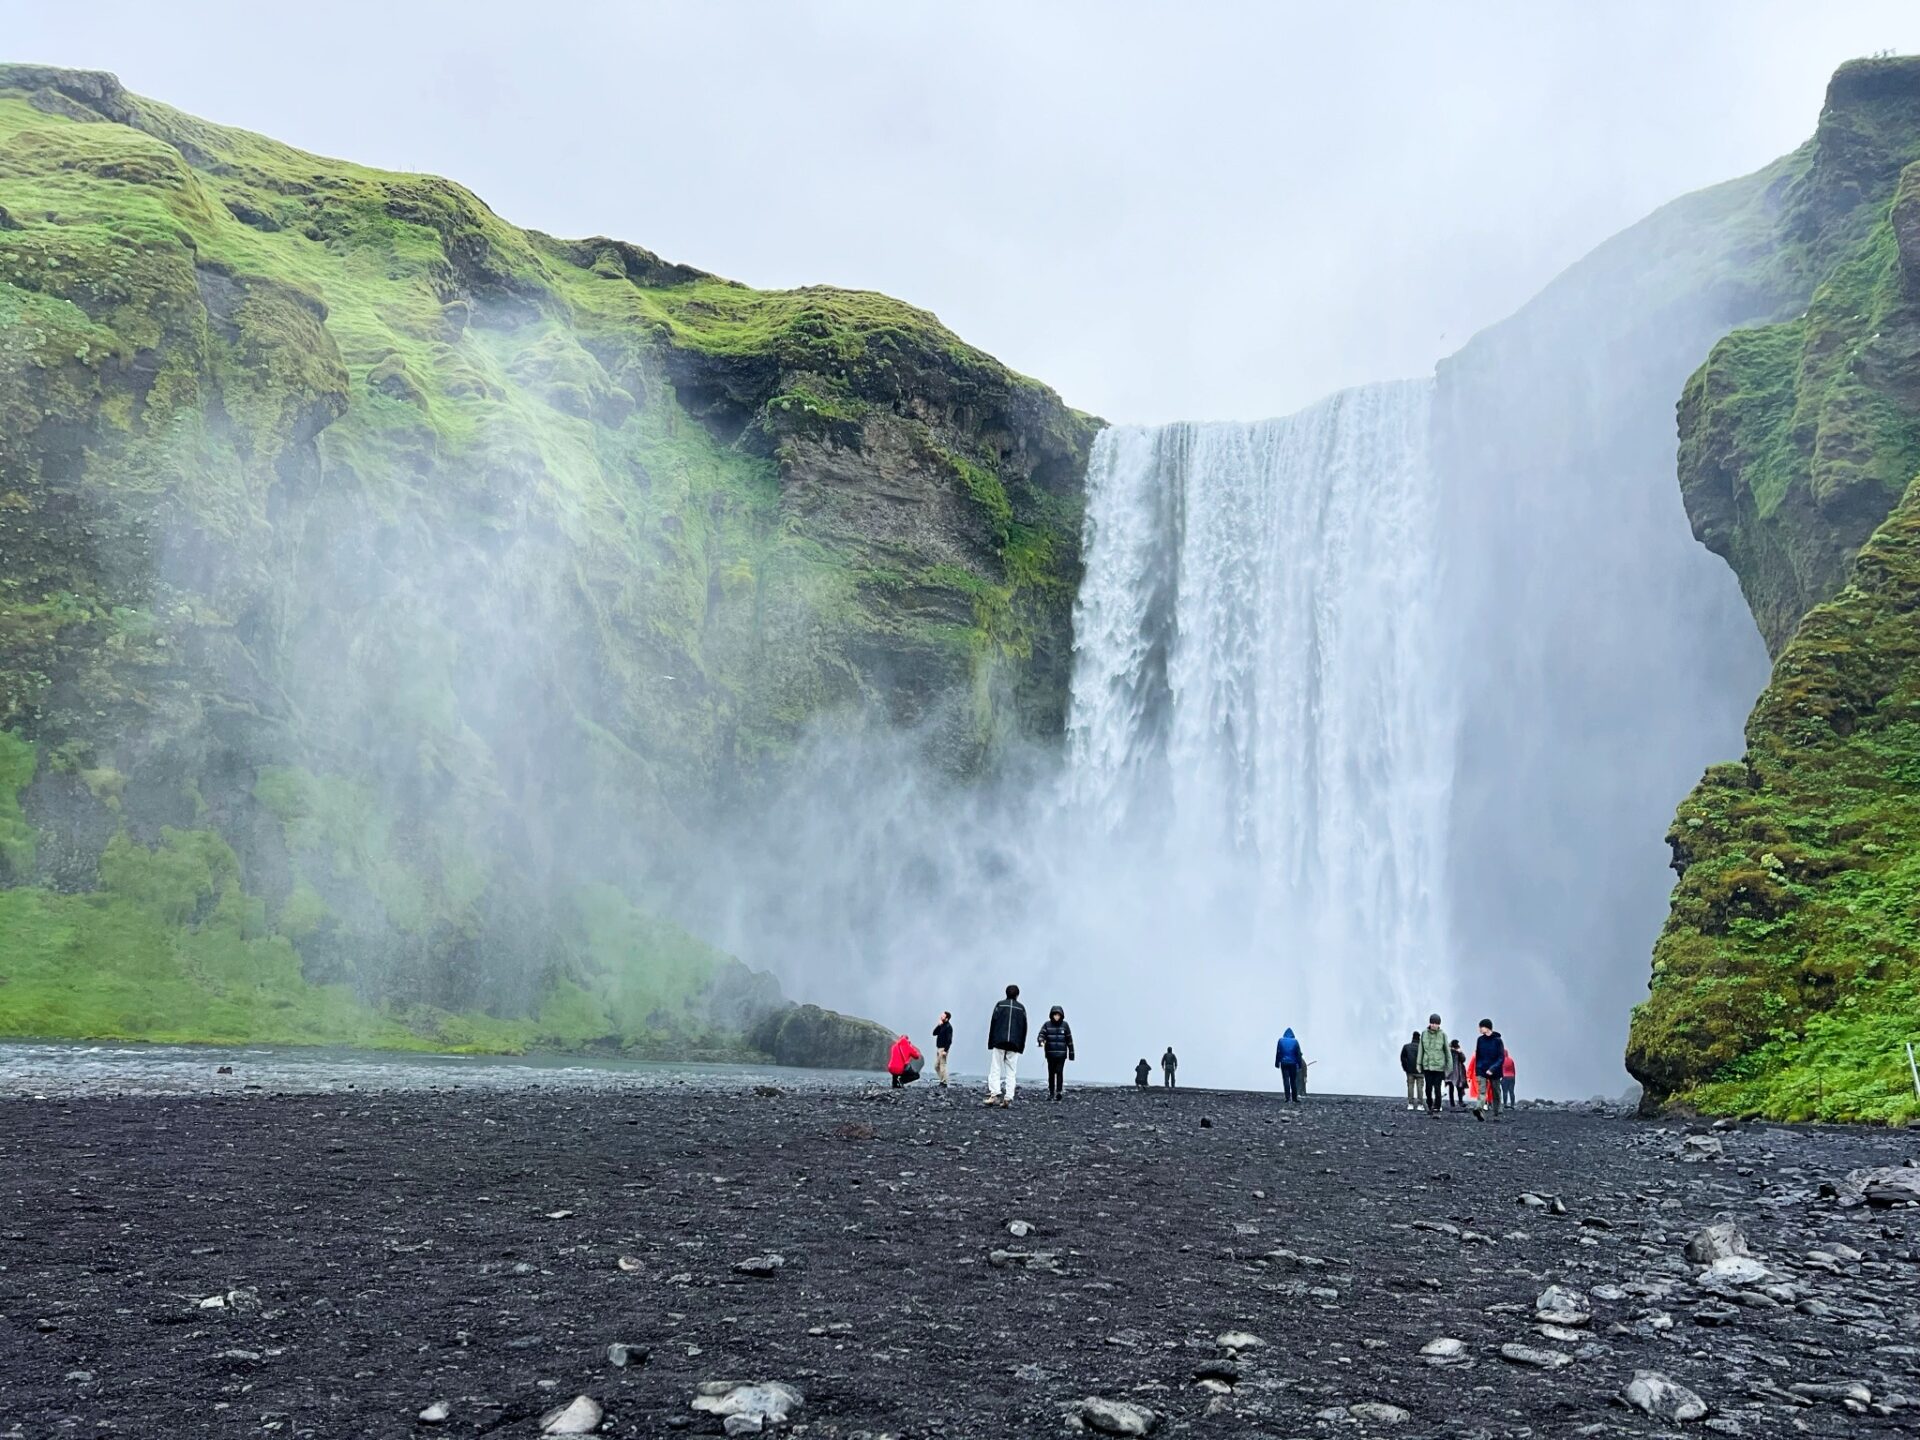 An 8-Day Itinerary of Iceland: The Ultimate “Best of” Iceland